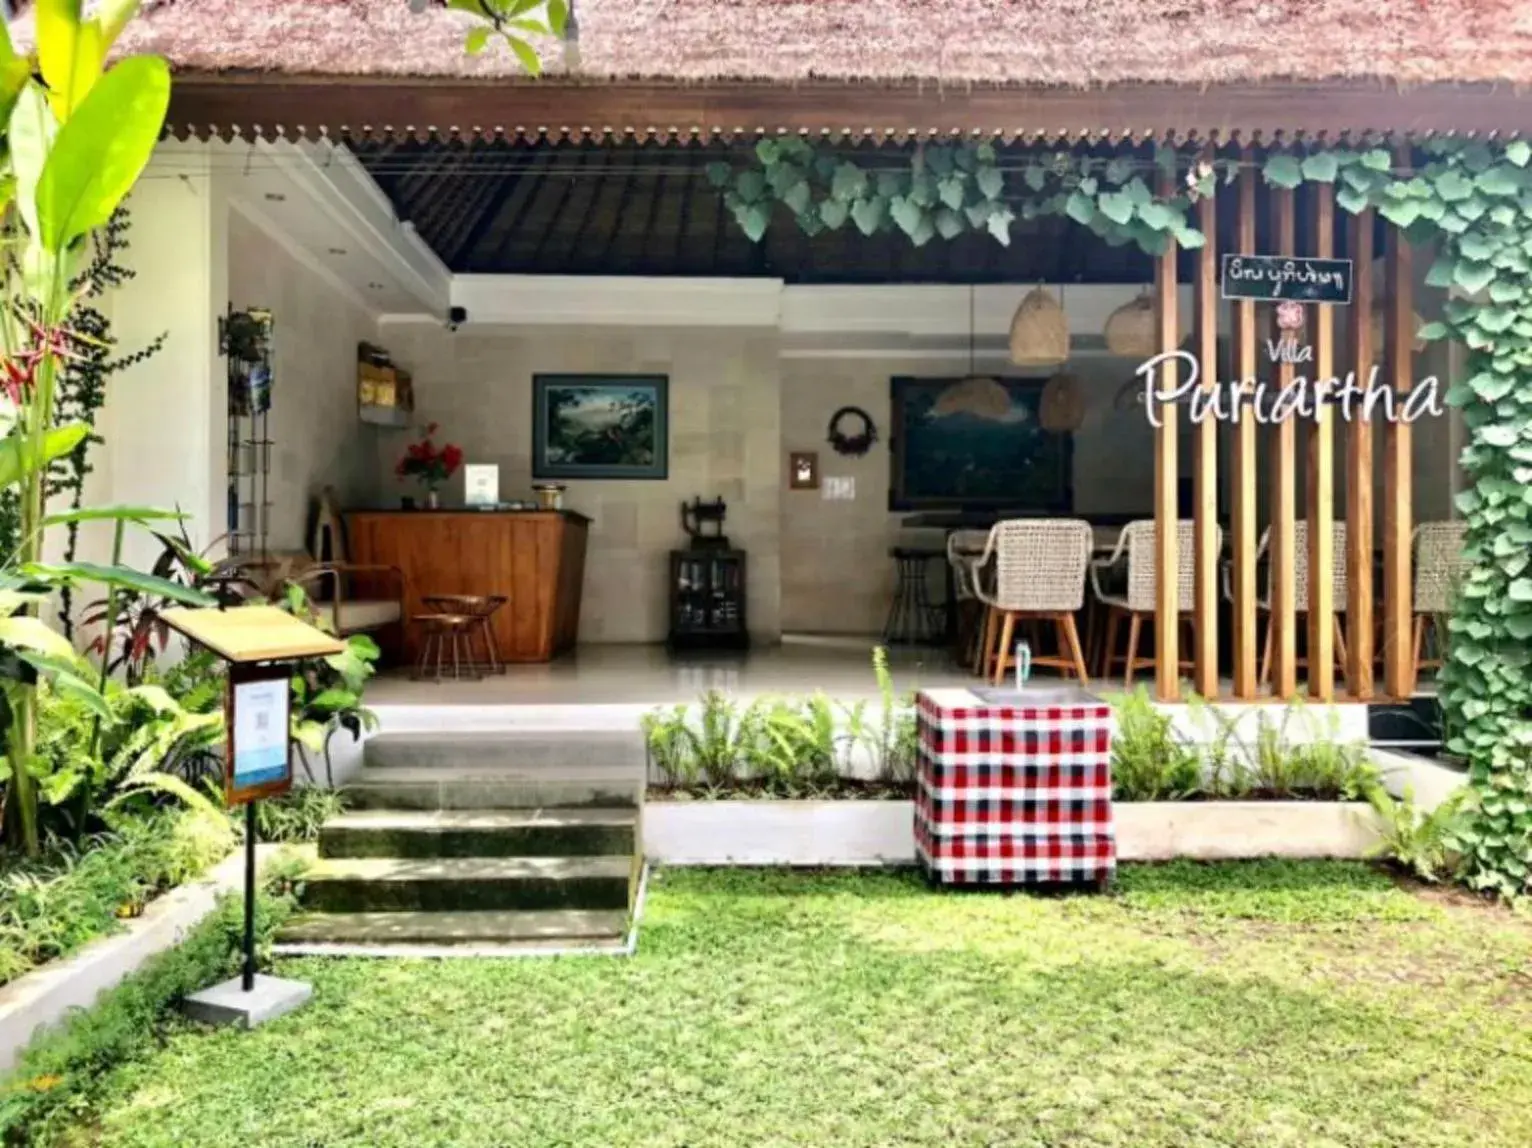 Property building in Villa Puriartha Ubud - CHSE Certified